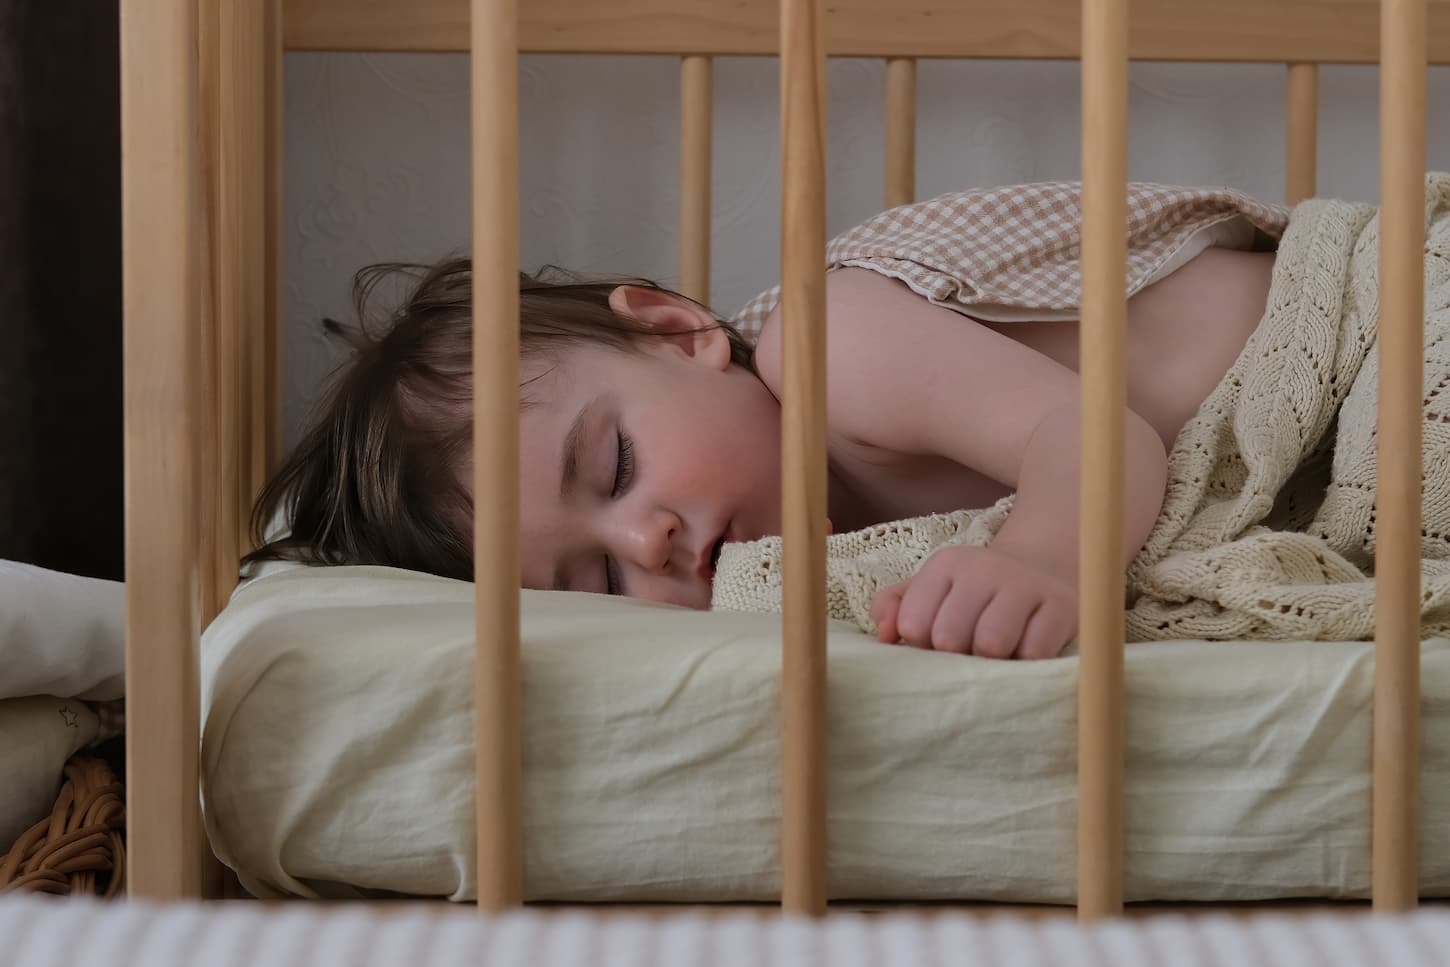 An image of a baby sleeping sweetly in a crib.